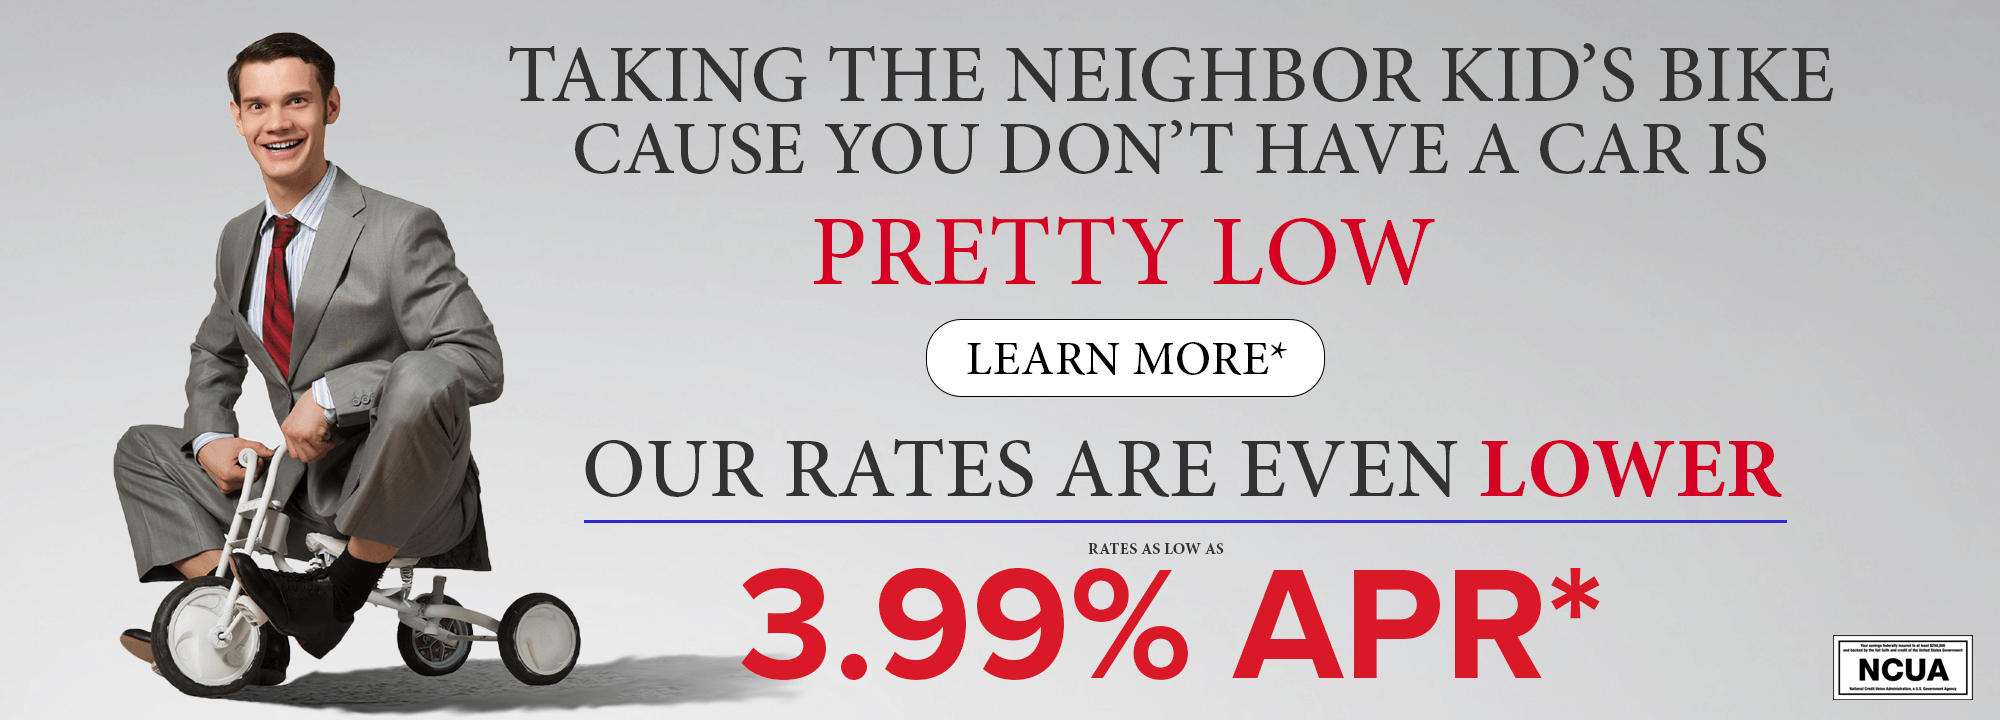 Taking the neighbor kid's bike cause you don't have a car is pretty low. Learn More*. Our rates are even lower. Rates as low as 3.99% APR*